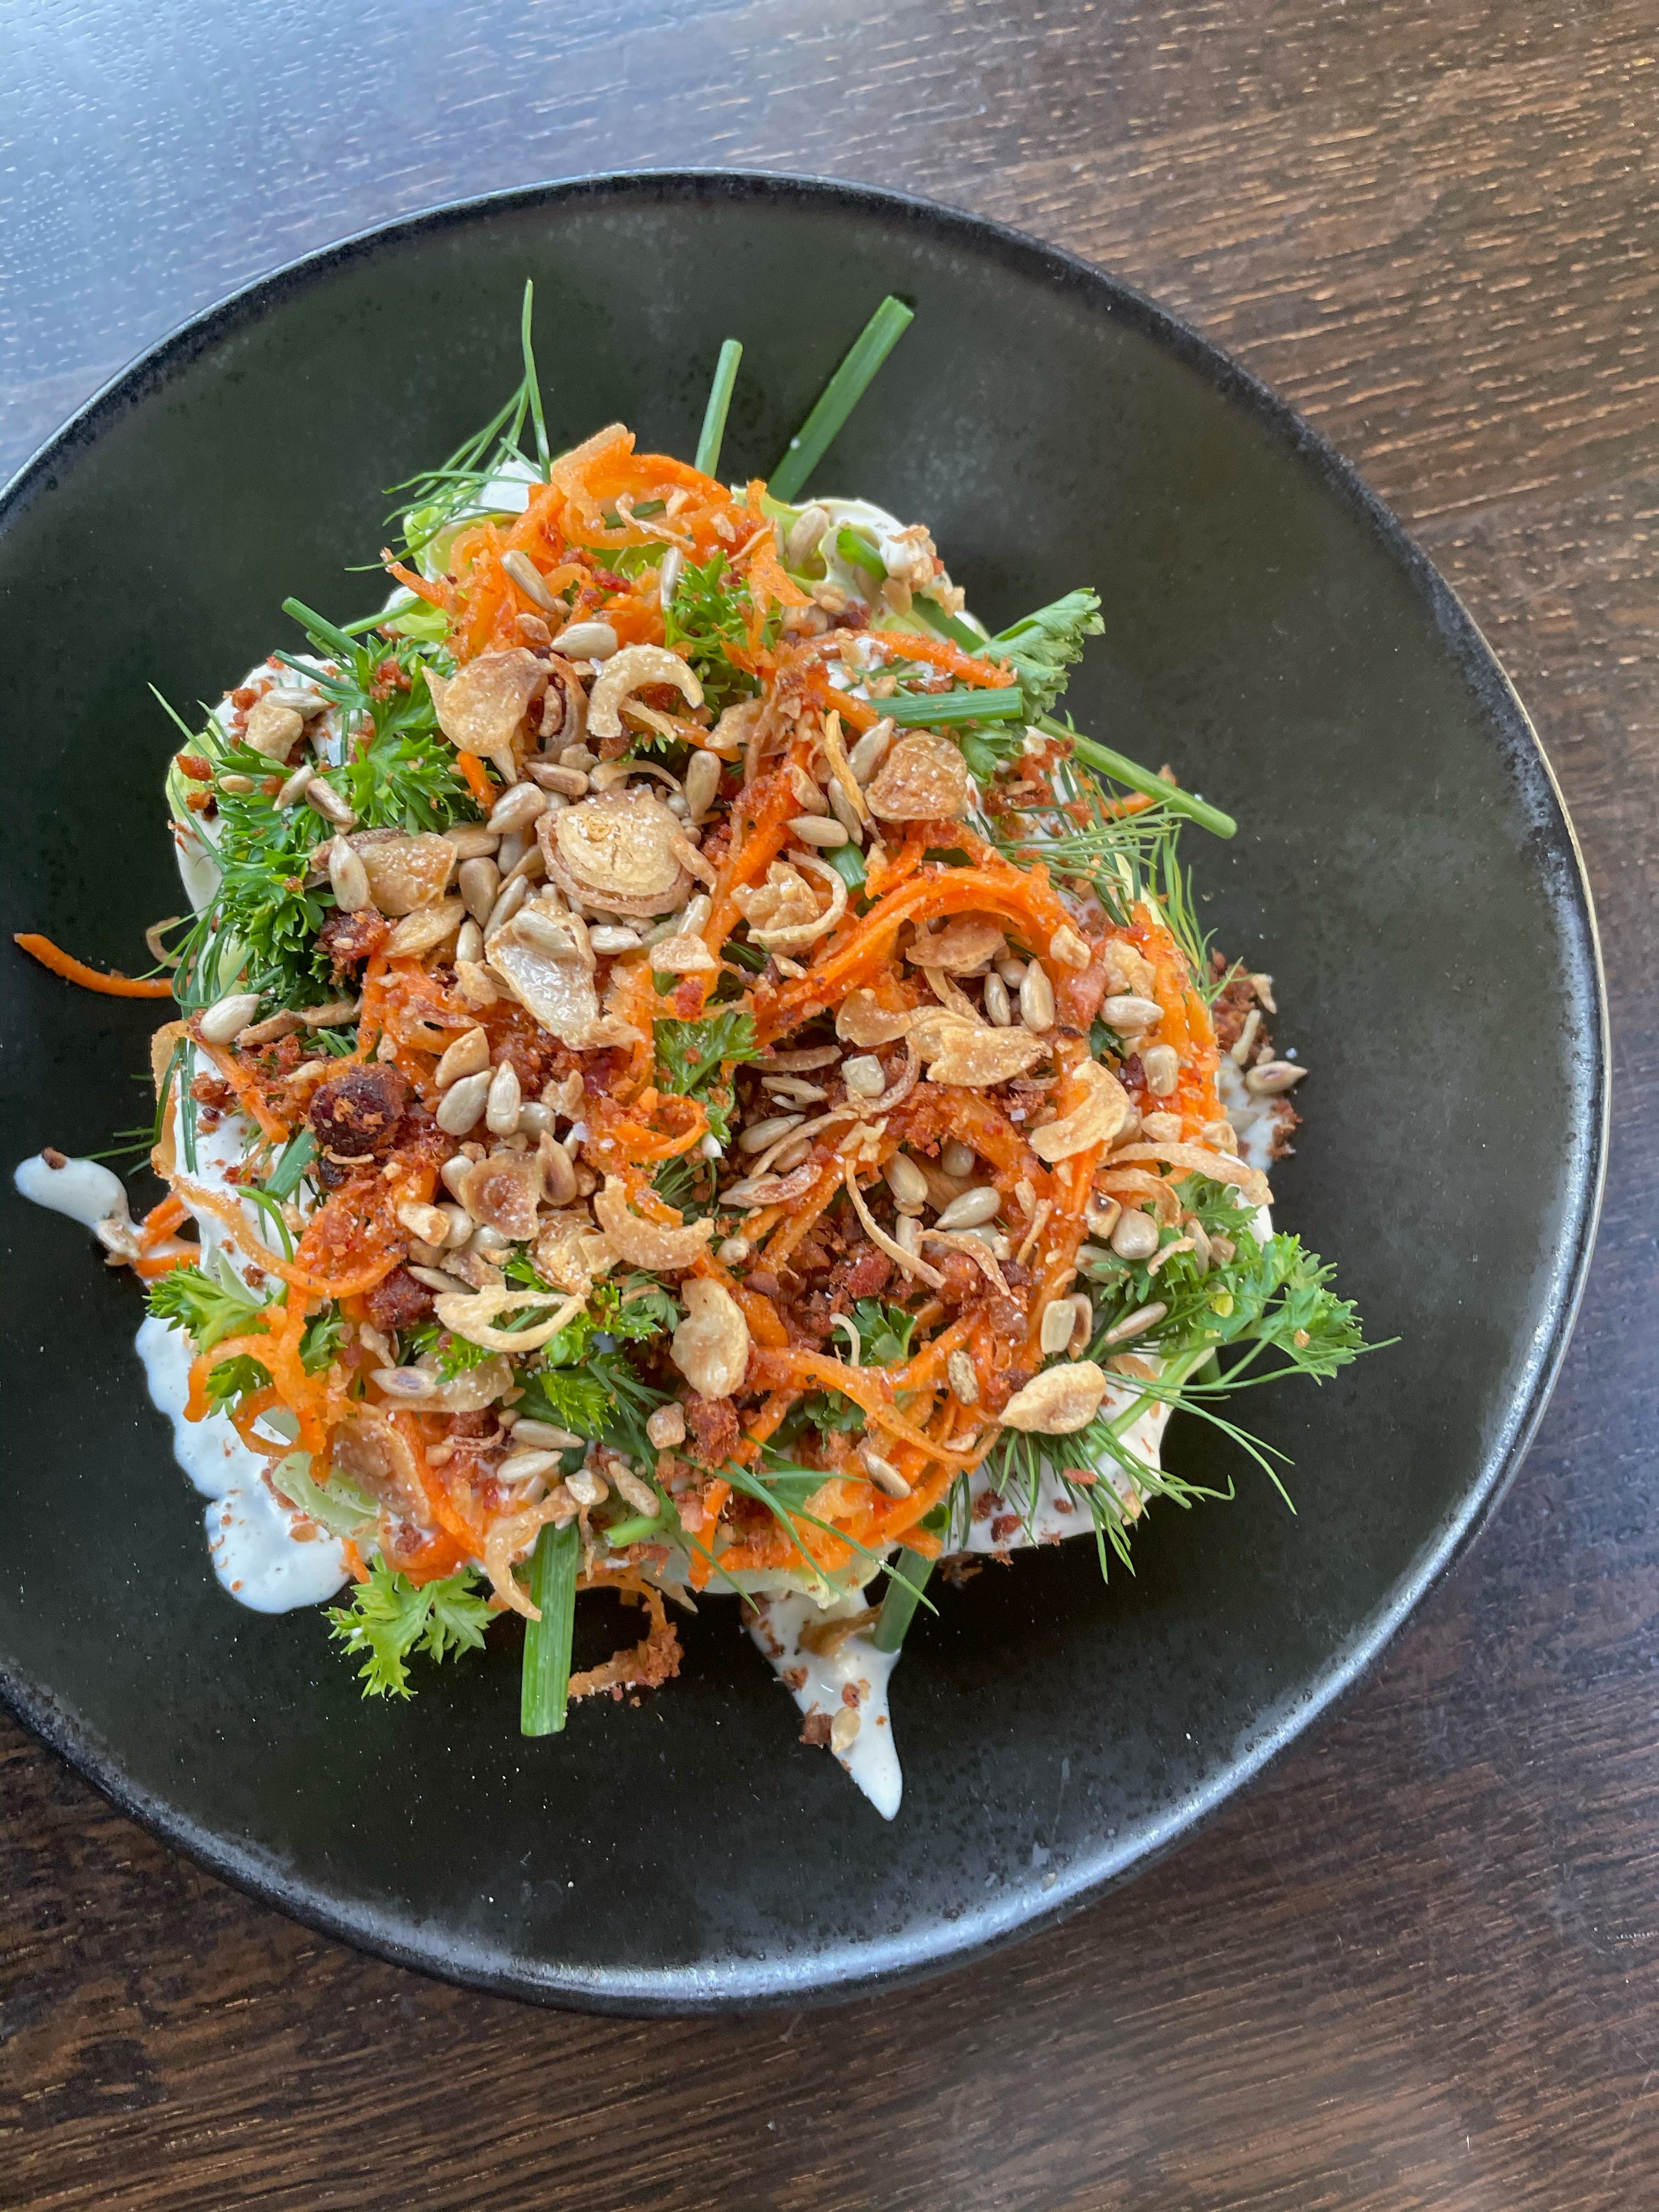 Smaller plates at Fool's Errand  include a wedge salad with blue cheese dressing, bacon, pickled carrot, herbs and "everything" crumble of sesame and sunflower seeds, garlic and shallots.